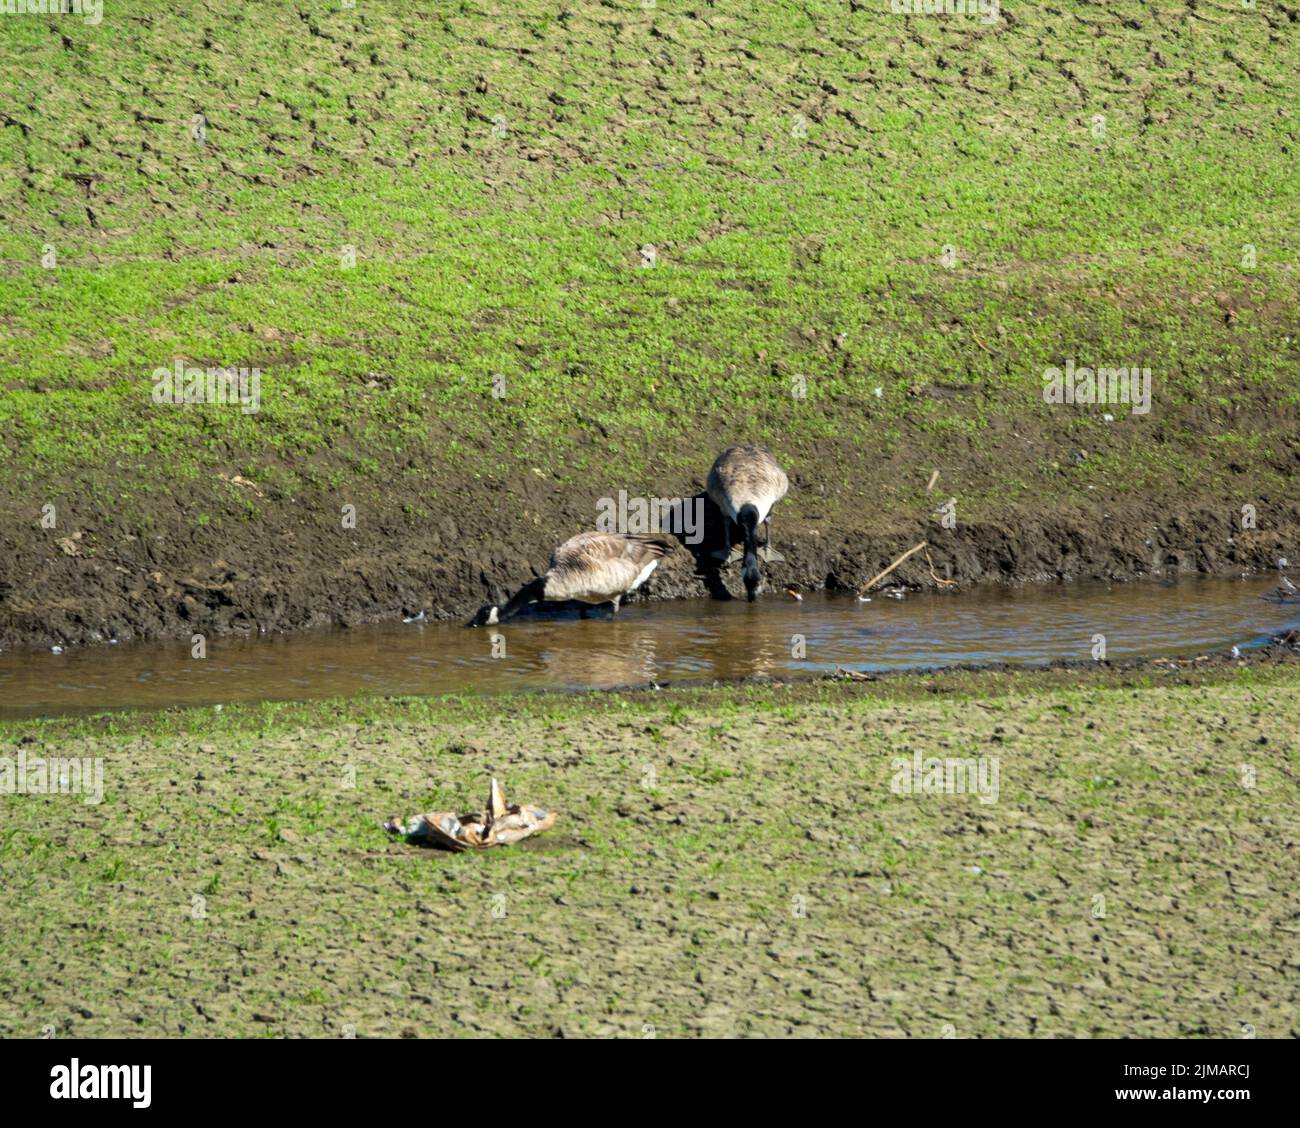 North Yorkshire, UK. 5th August, 2022. Canadian Geese (Branta canadensis) drink from the little remaining water at Lindley Wood Reservoir. Lindley Wood Reservoir, used by Yorkshire Water to supply drinking water to Leeds and surrounding areas, is nearly empty and dry. Credit: Bradley Taylor / Alamy News Stock Photo